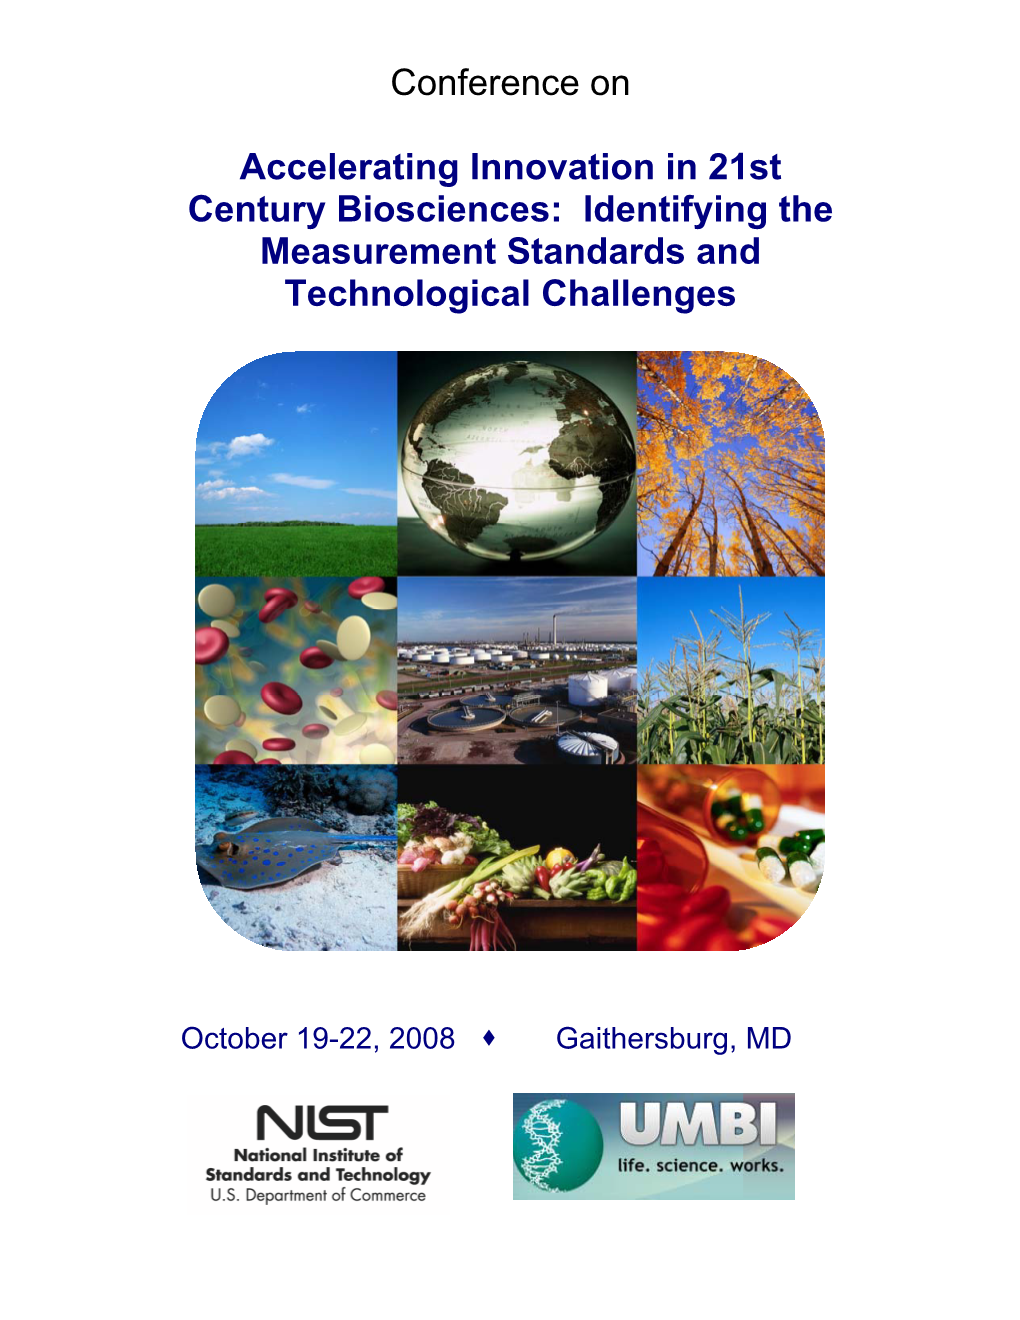 Accelerating Innovation in 21St Century Biosciences: Identifying the Measurement Standards and Technological Challenges